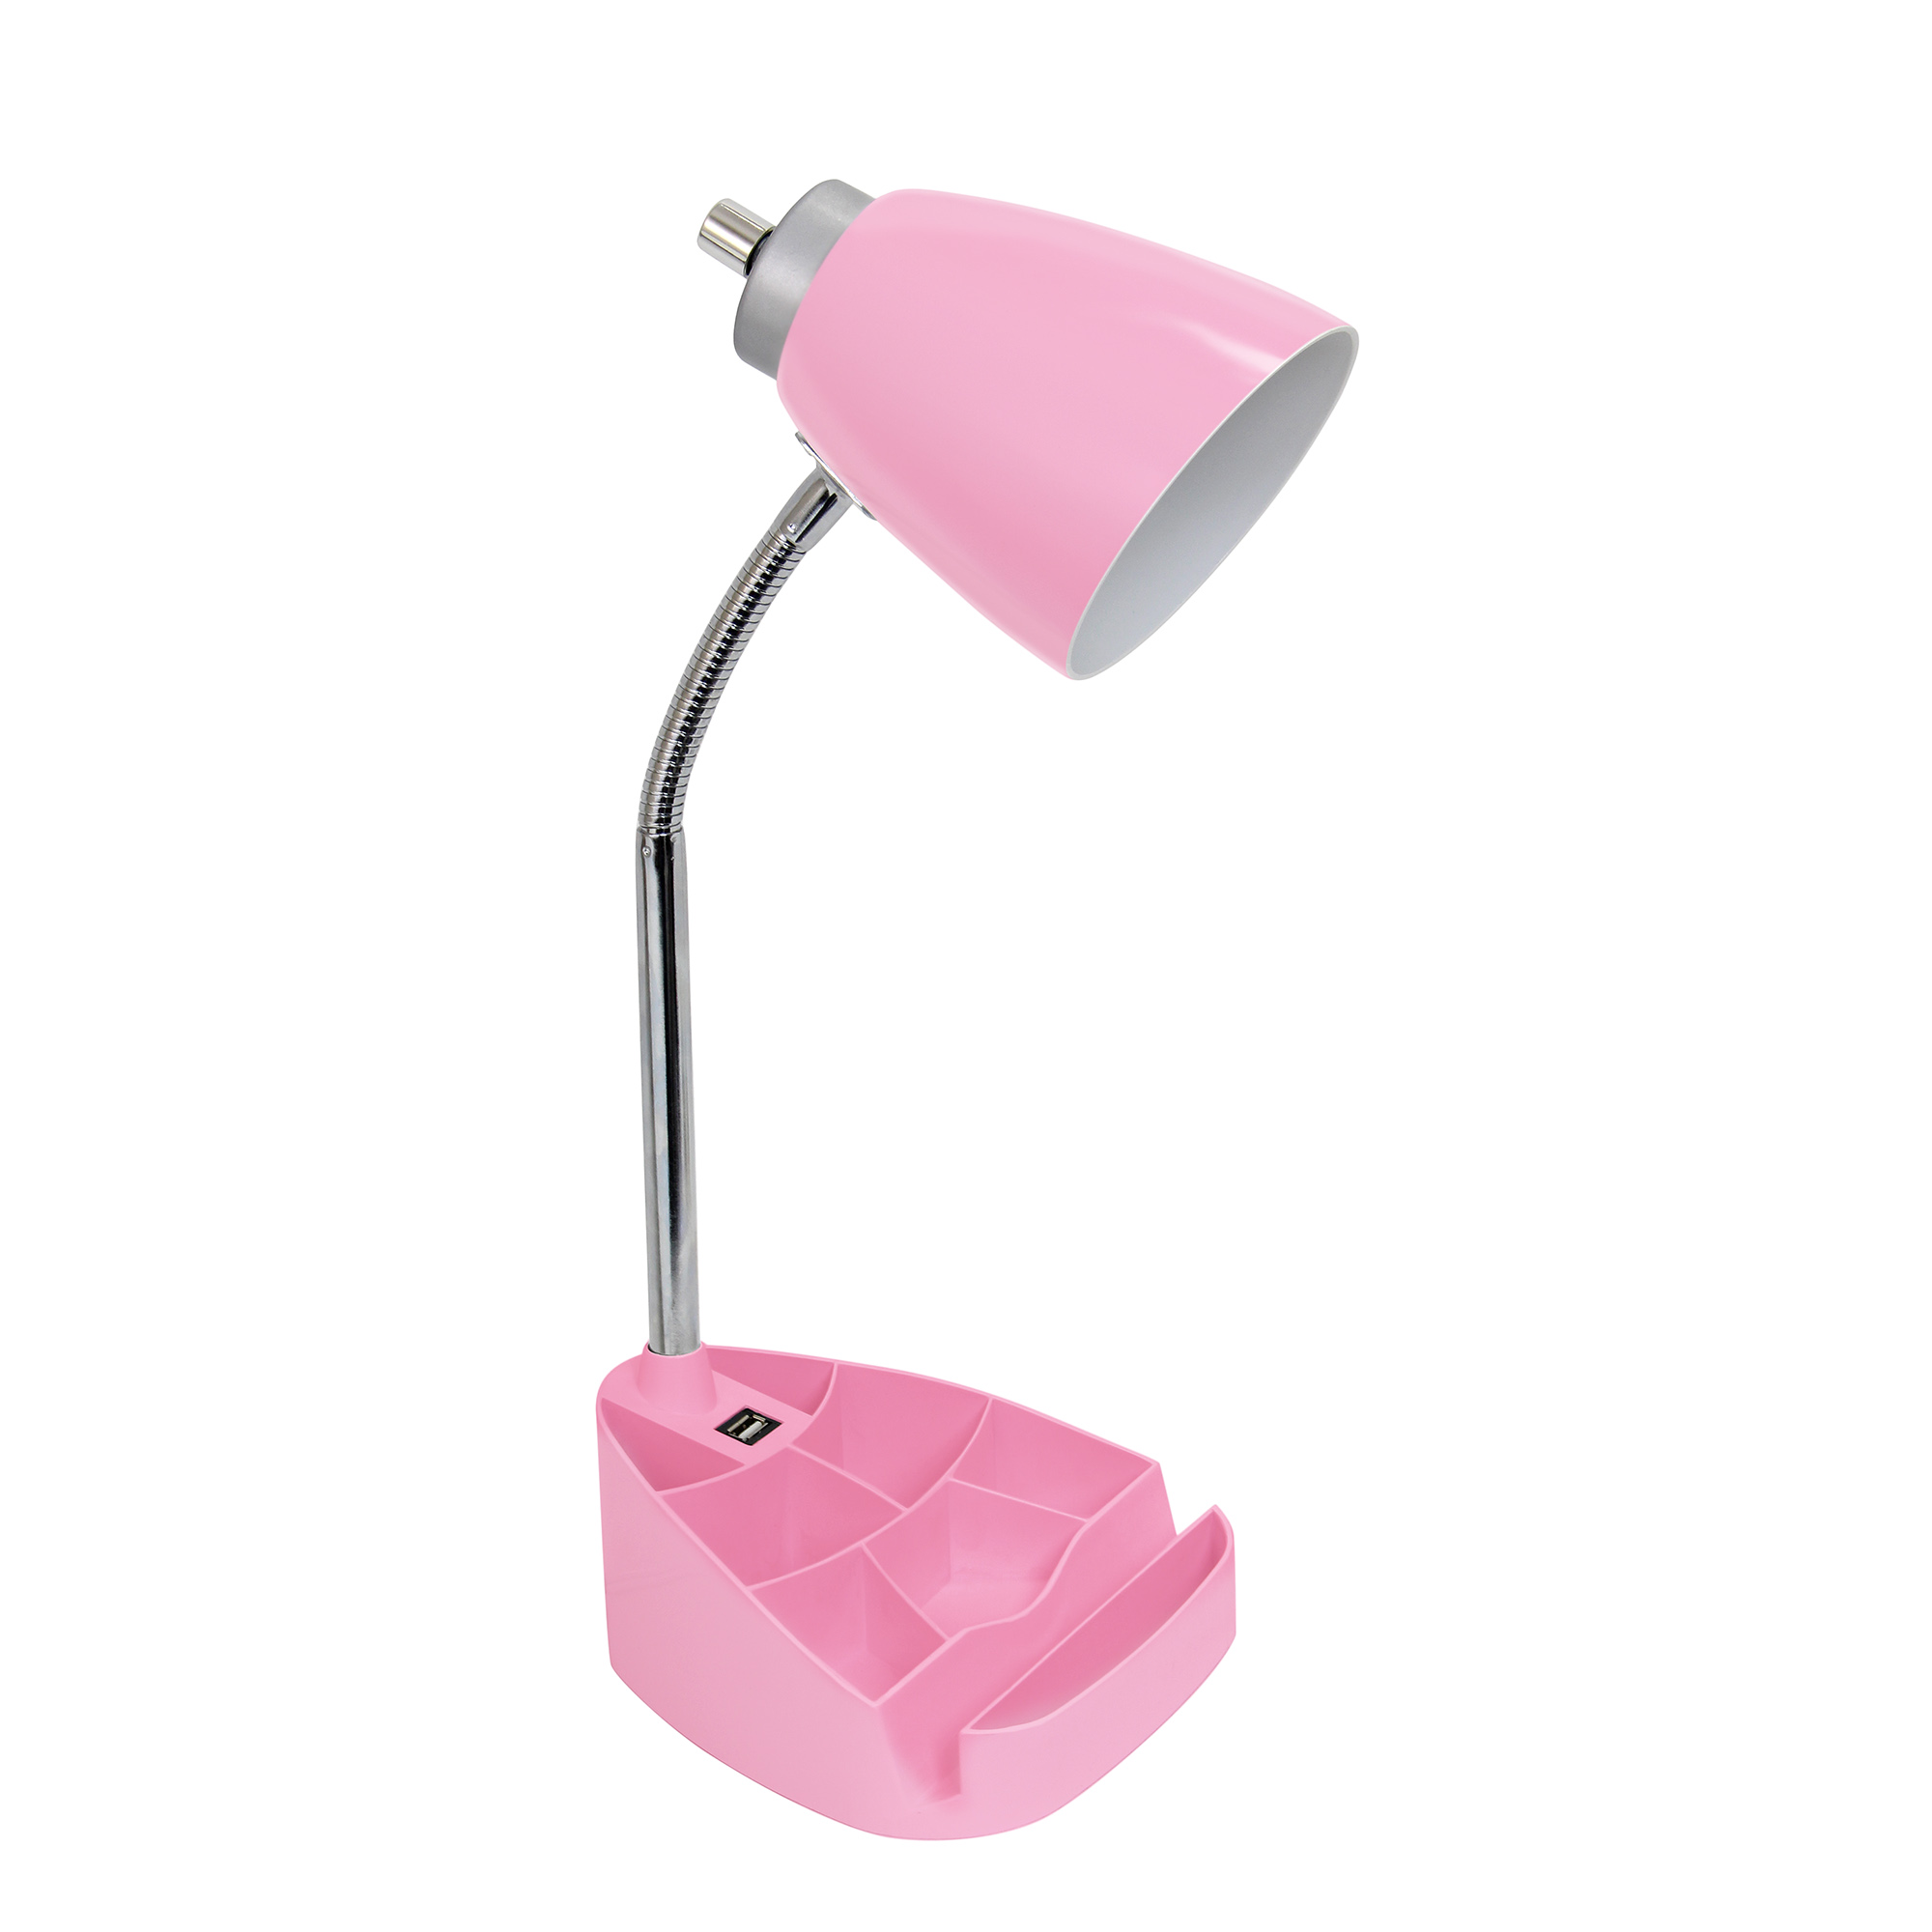 Simple Designs Gooseneck Organizer Desk Lamp with iPad Tablet Stand Book Holder and USB port, Pink